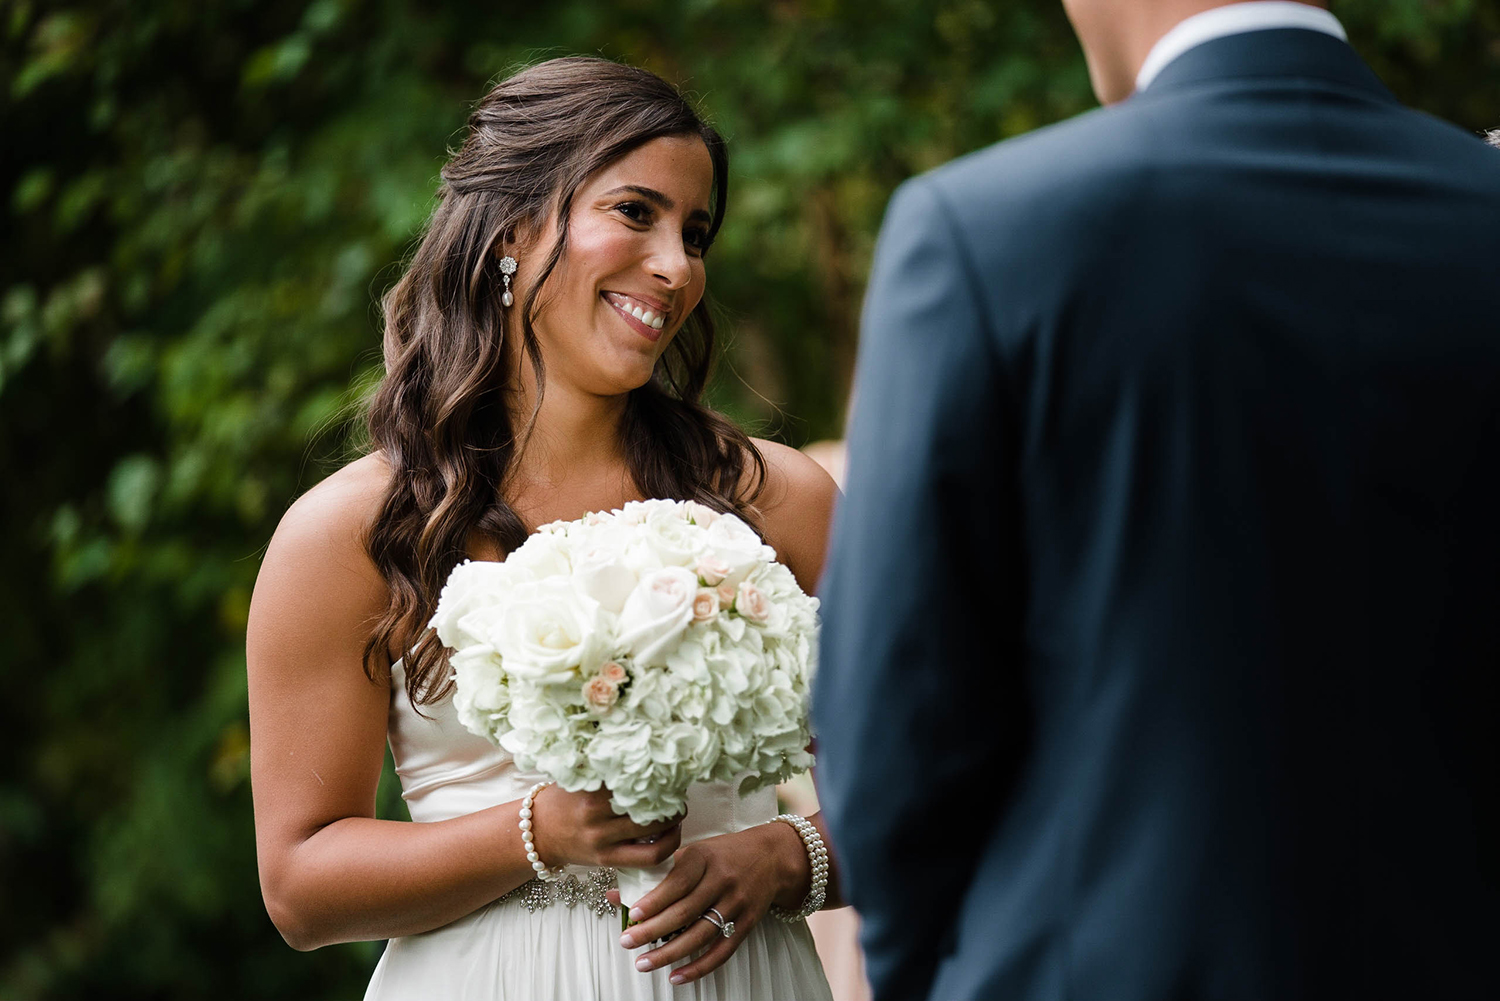 A documentary photograph of a bride smiling during her outdoor wedding ceremony at the Inn at Hastings Park outside of Boston